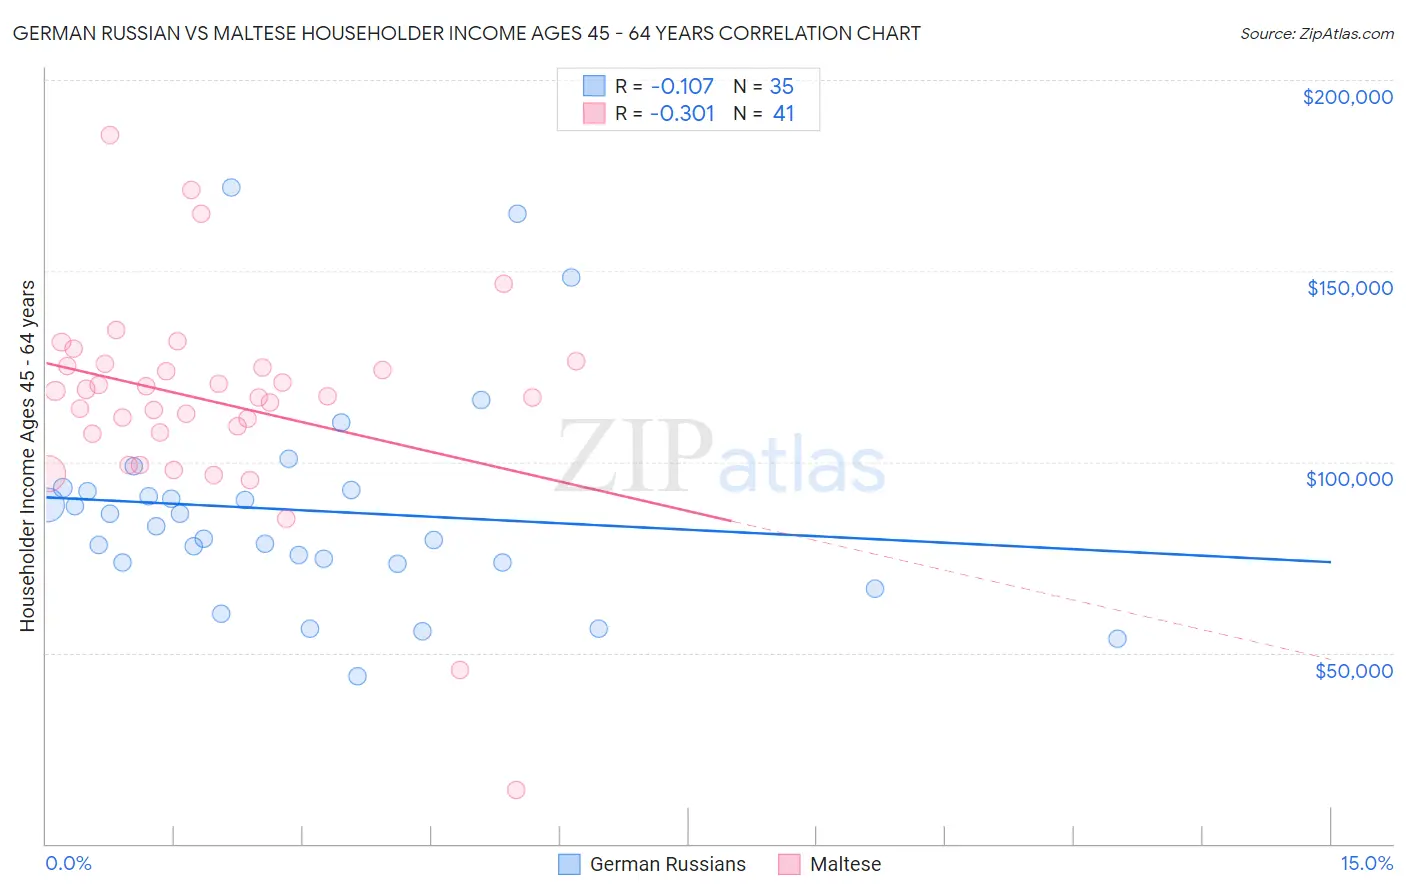 German Russian vs Maltese Householder Income Ages 45 - 64 years